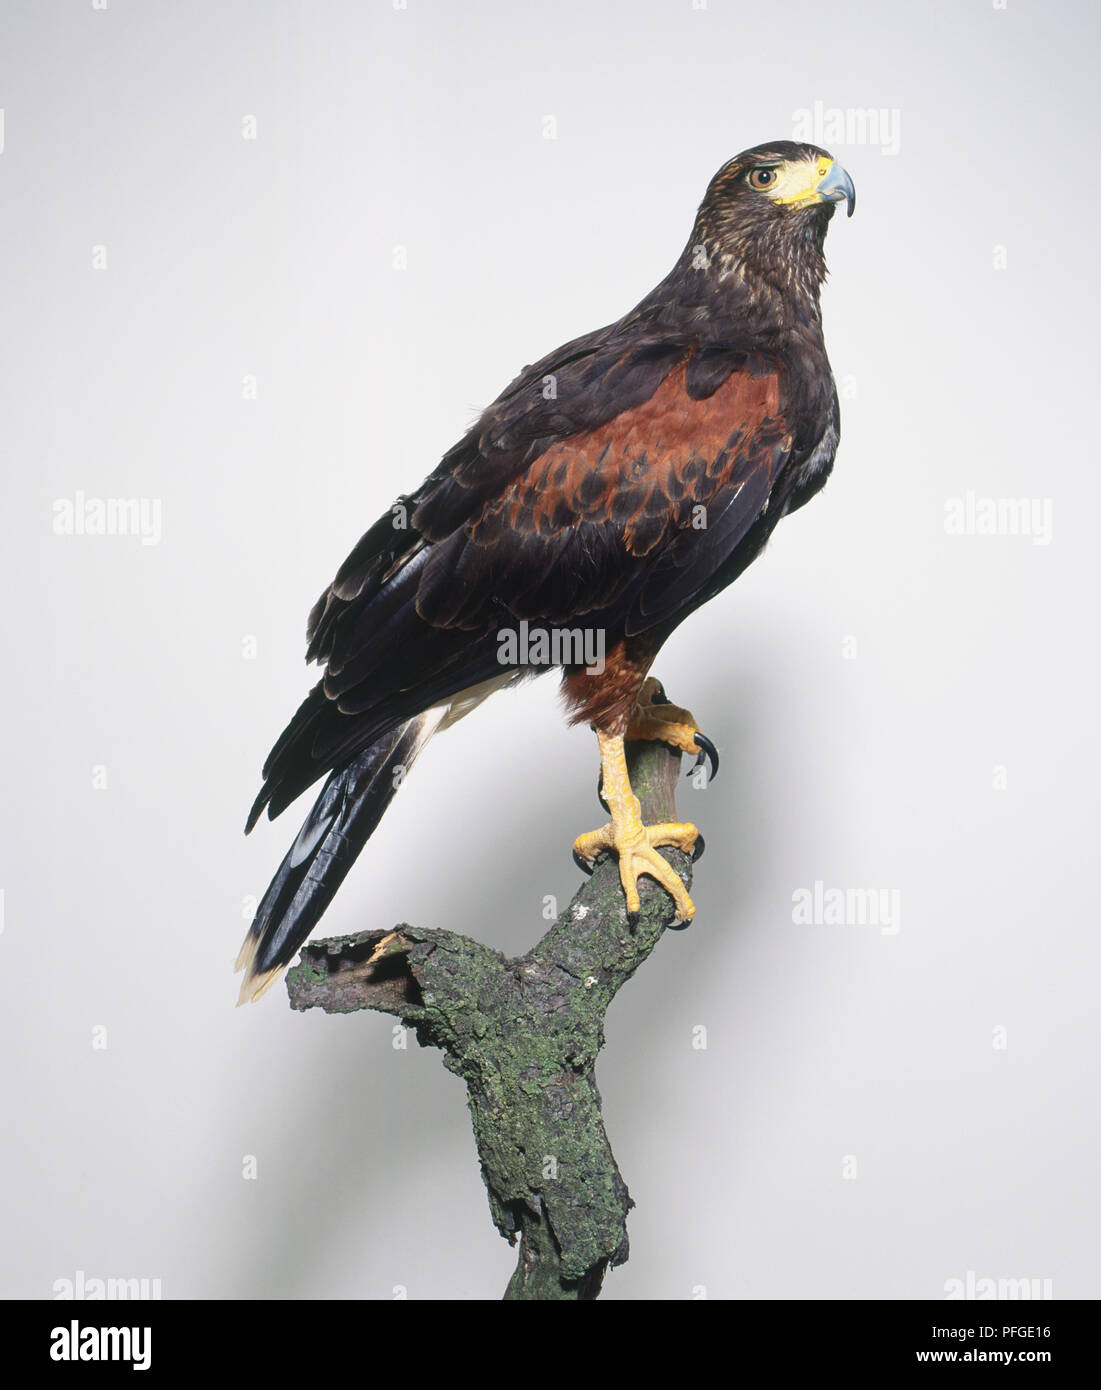 Side view of a heavily built Harris's Hawk perching on a branch, with its head in profile, showing the curved bill, chestnut wing patch, and strong feet. Stock Photo